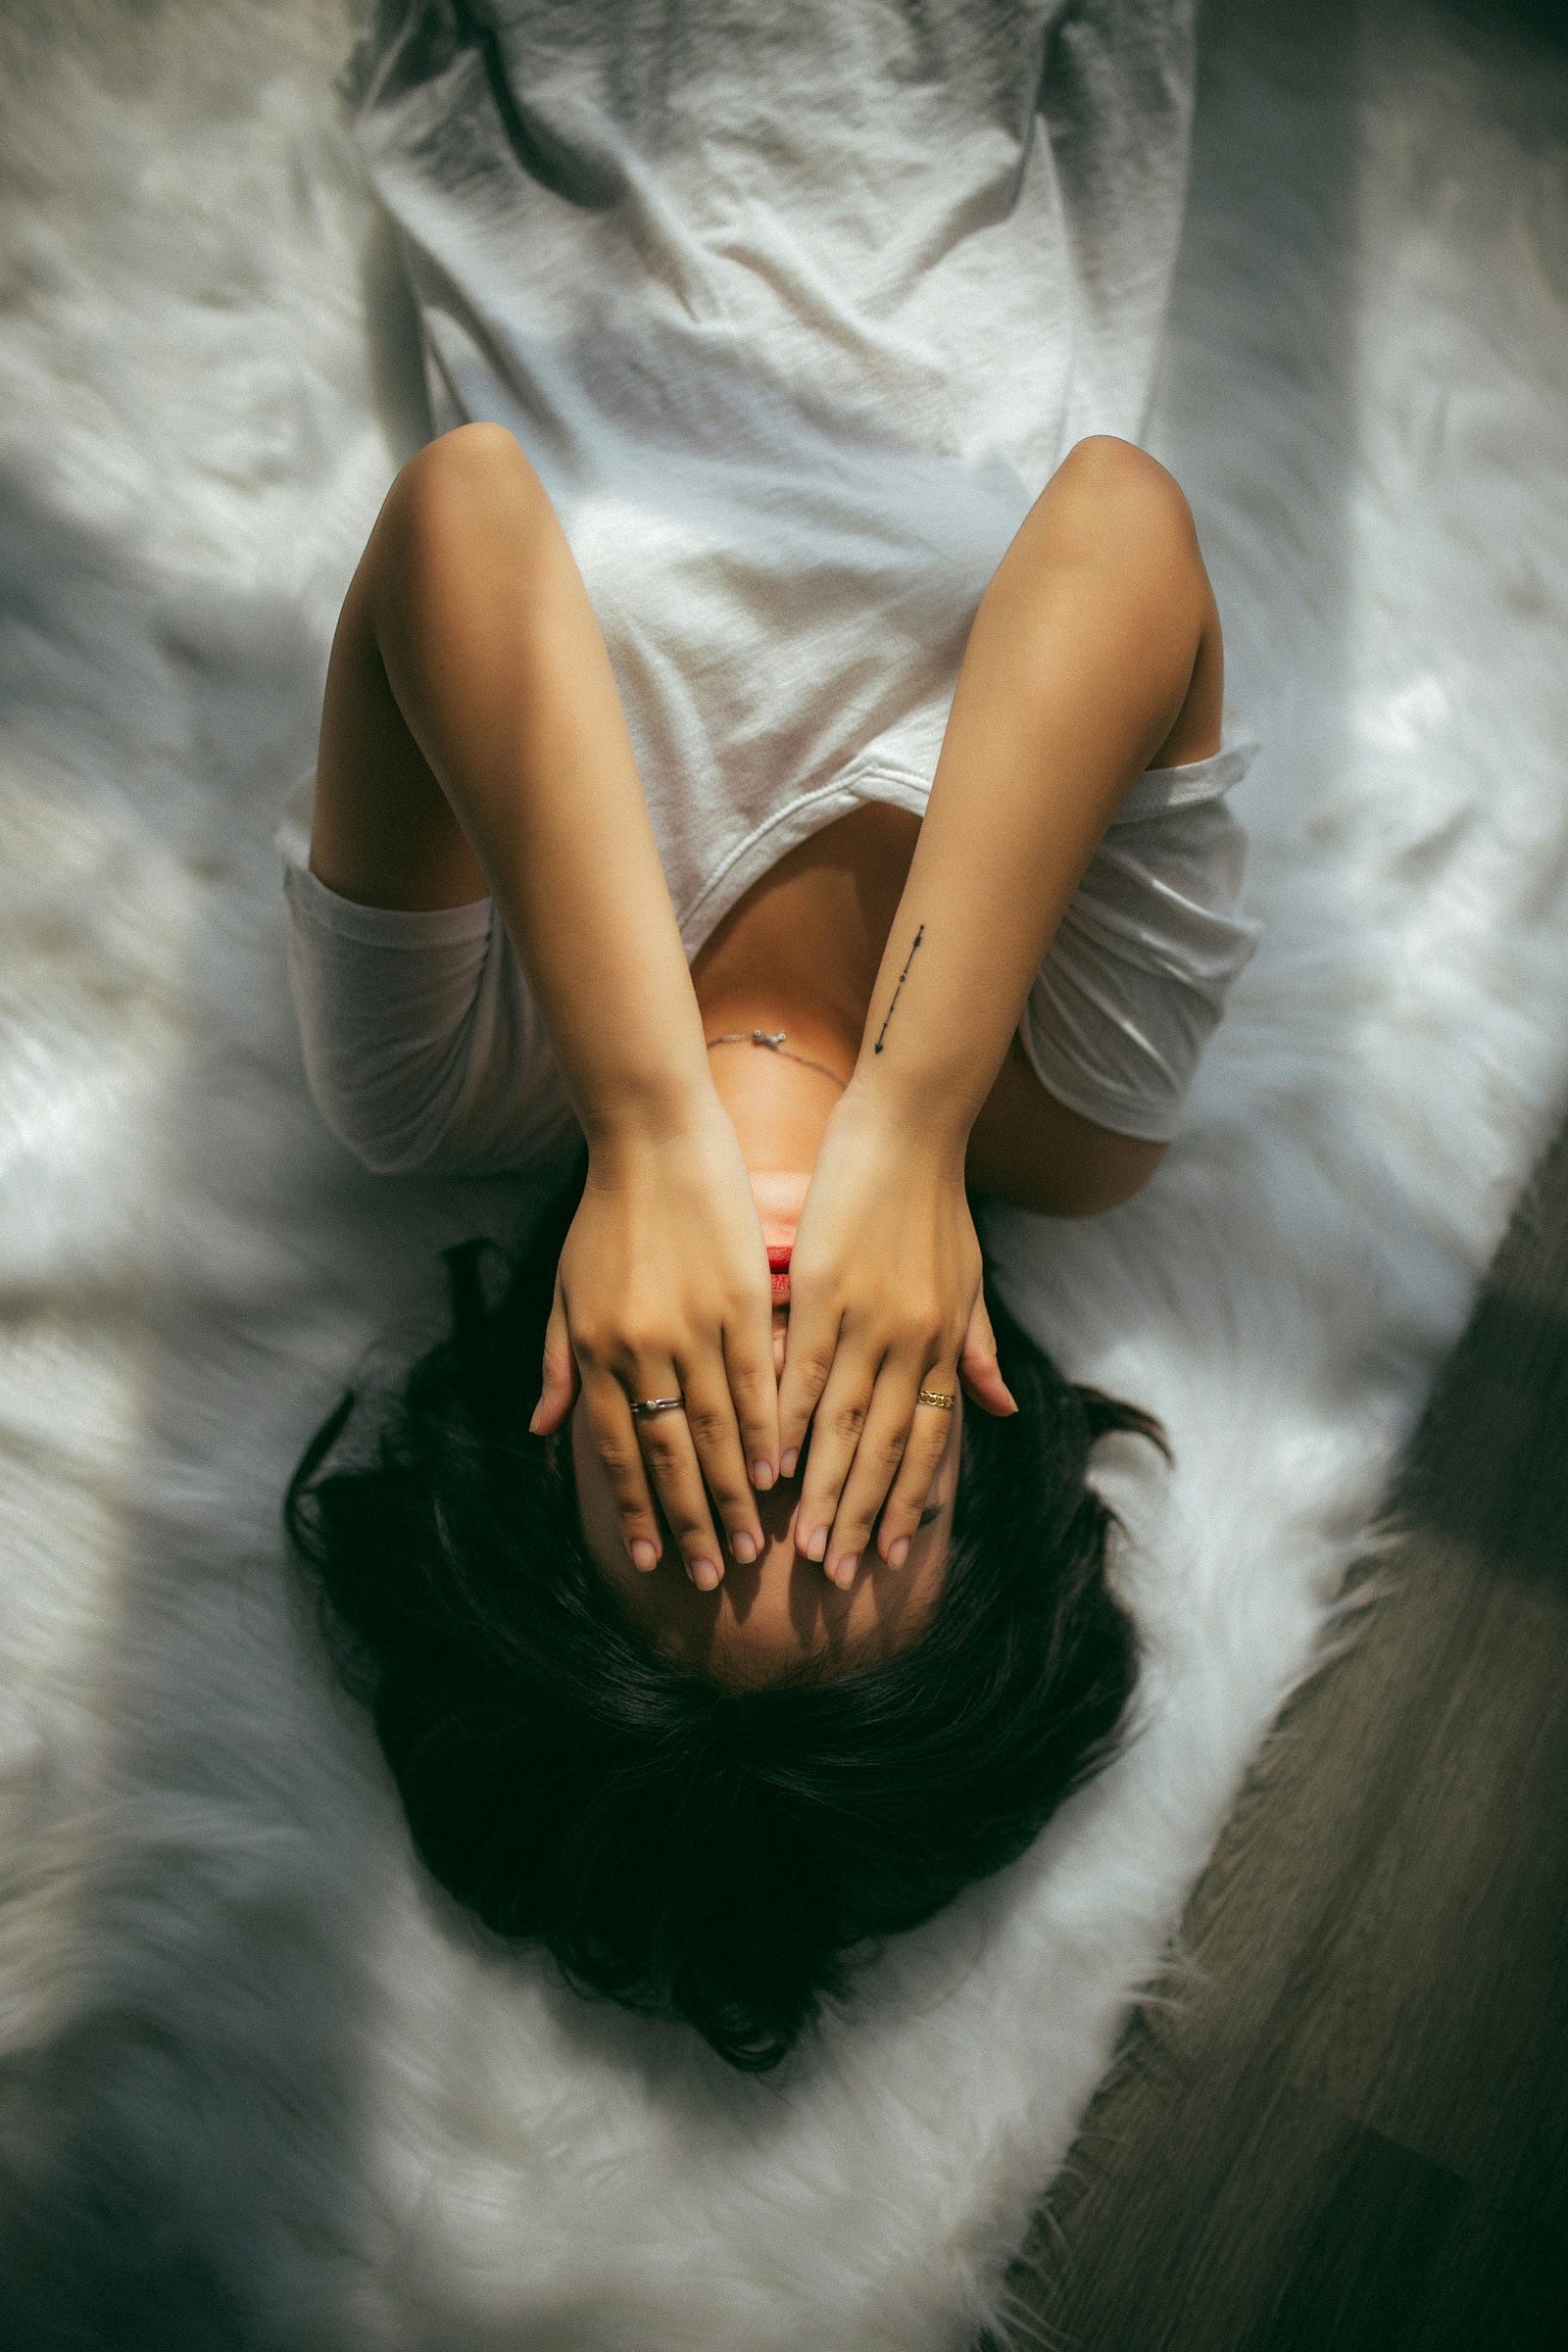 A woman lies on her bed, her head down toward the image bottom. She has her hands over her eyes. The alarm system kicks in when we perceive danger, triggering the famous “fight or flight” response. While this response can be life-saving in emergencies, our bodies sometimes misinterpret everyday situations as threats, leading to chronic stress.